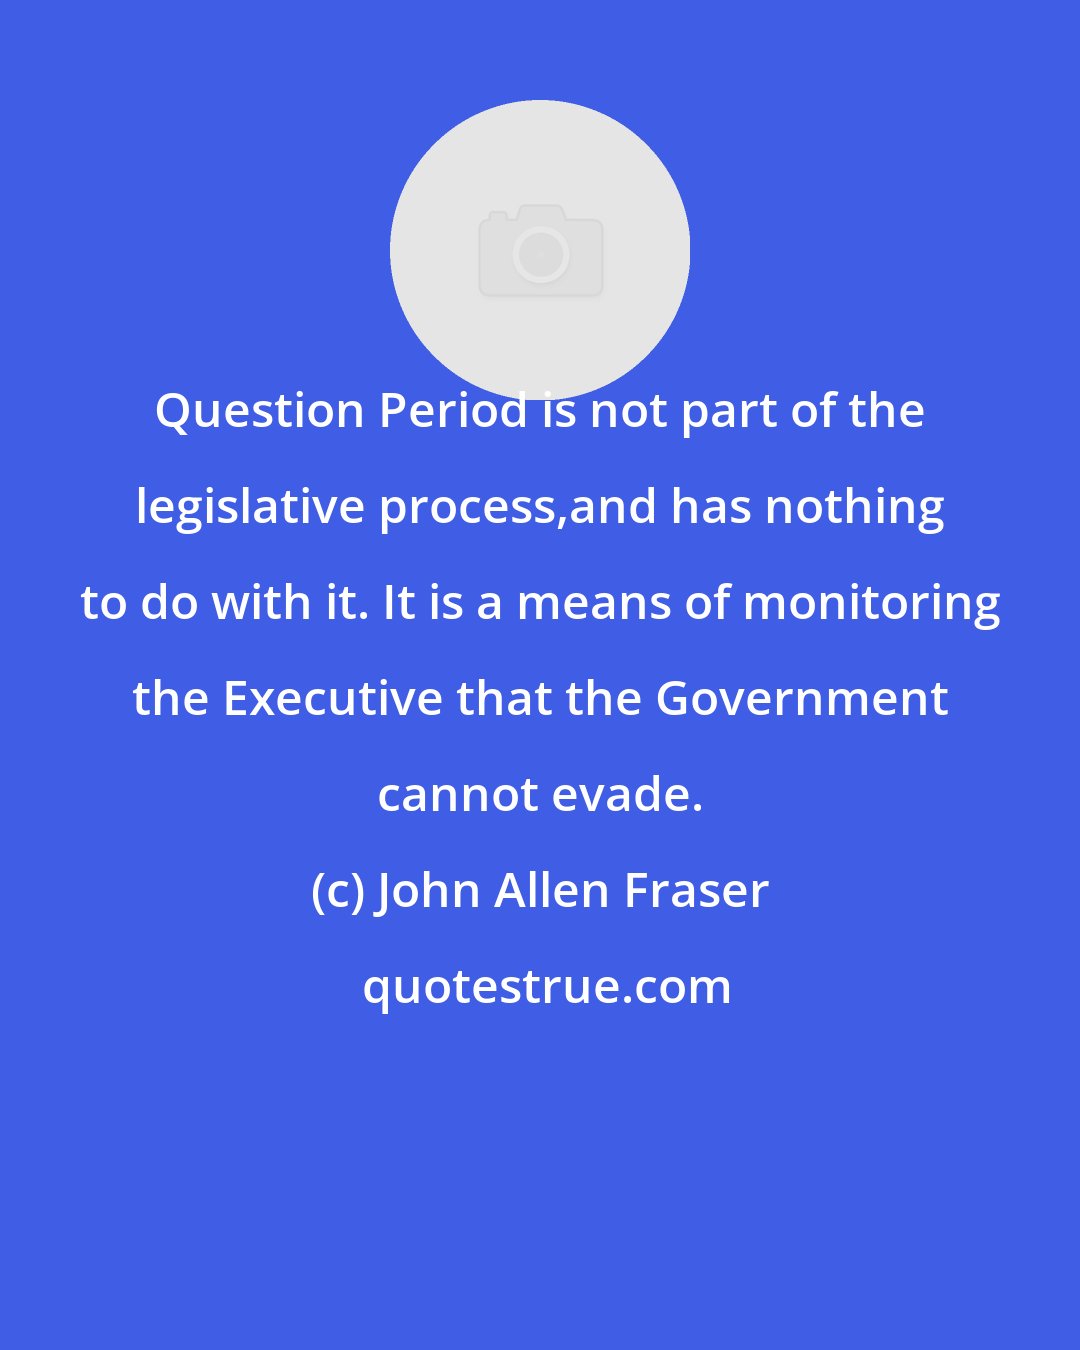 John Allen Fraser: Question Period is not part of the legislative process,and has nothing to do with it. It is a means of monitoring the Executive that the Government cannot evade.